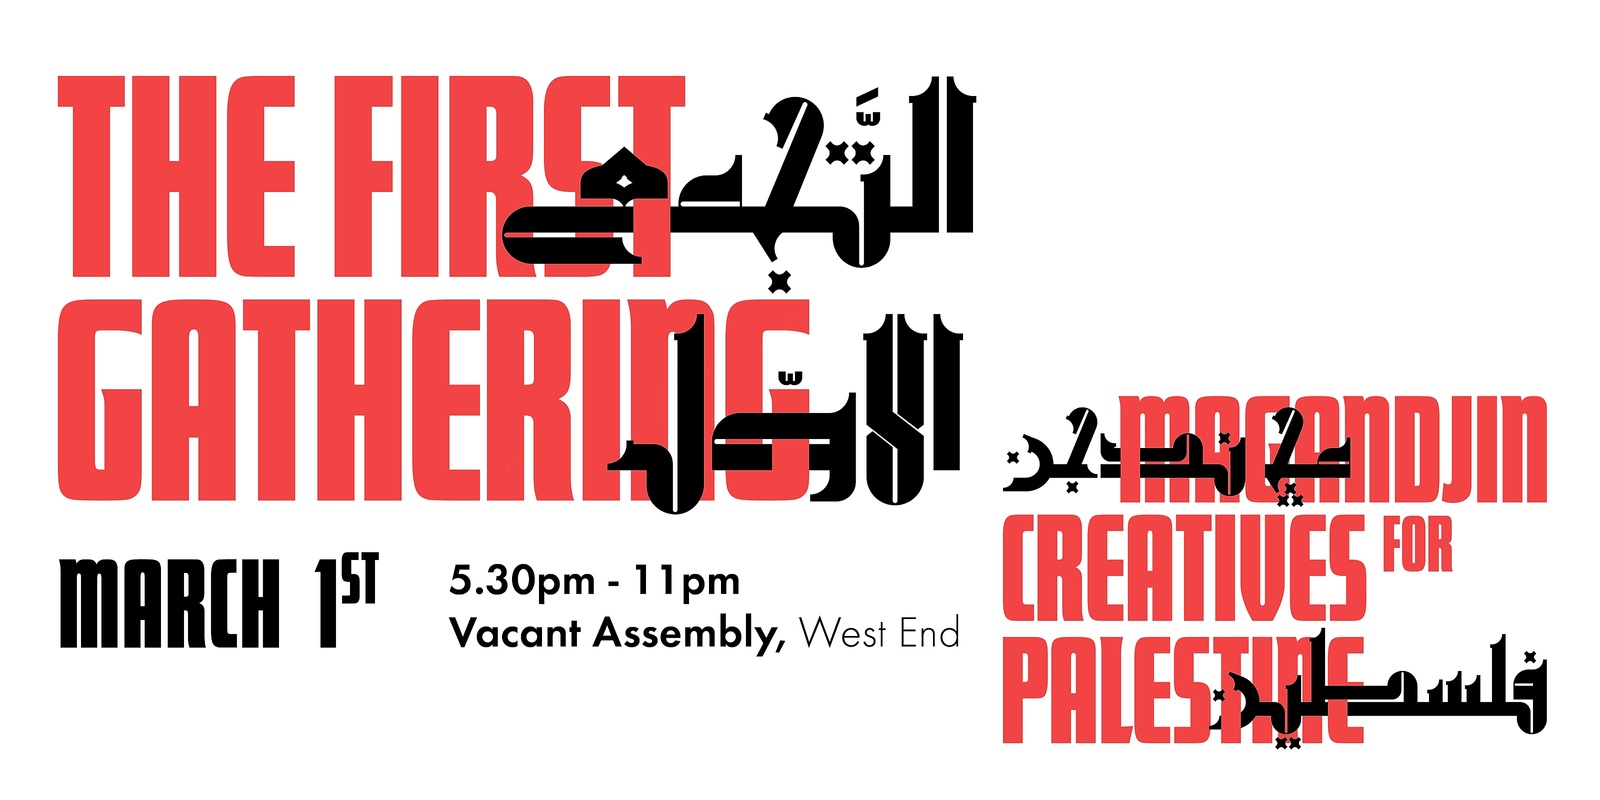 Banner image for The First Gathering,  التجمع الأول  by Magandjin Creatives for Palestine 